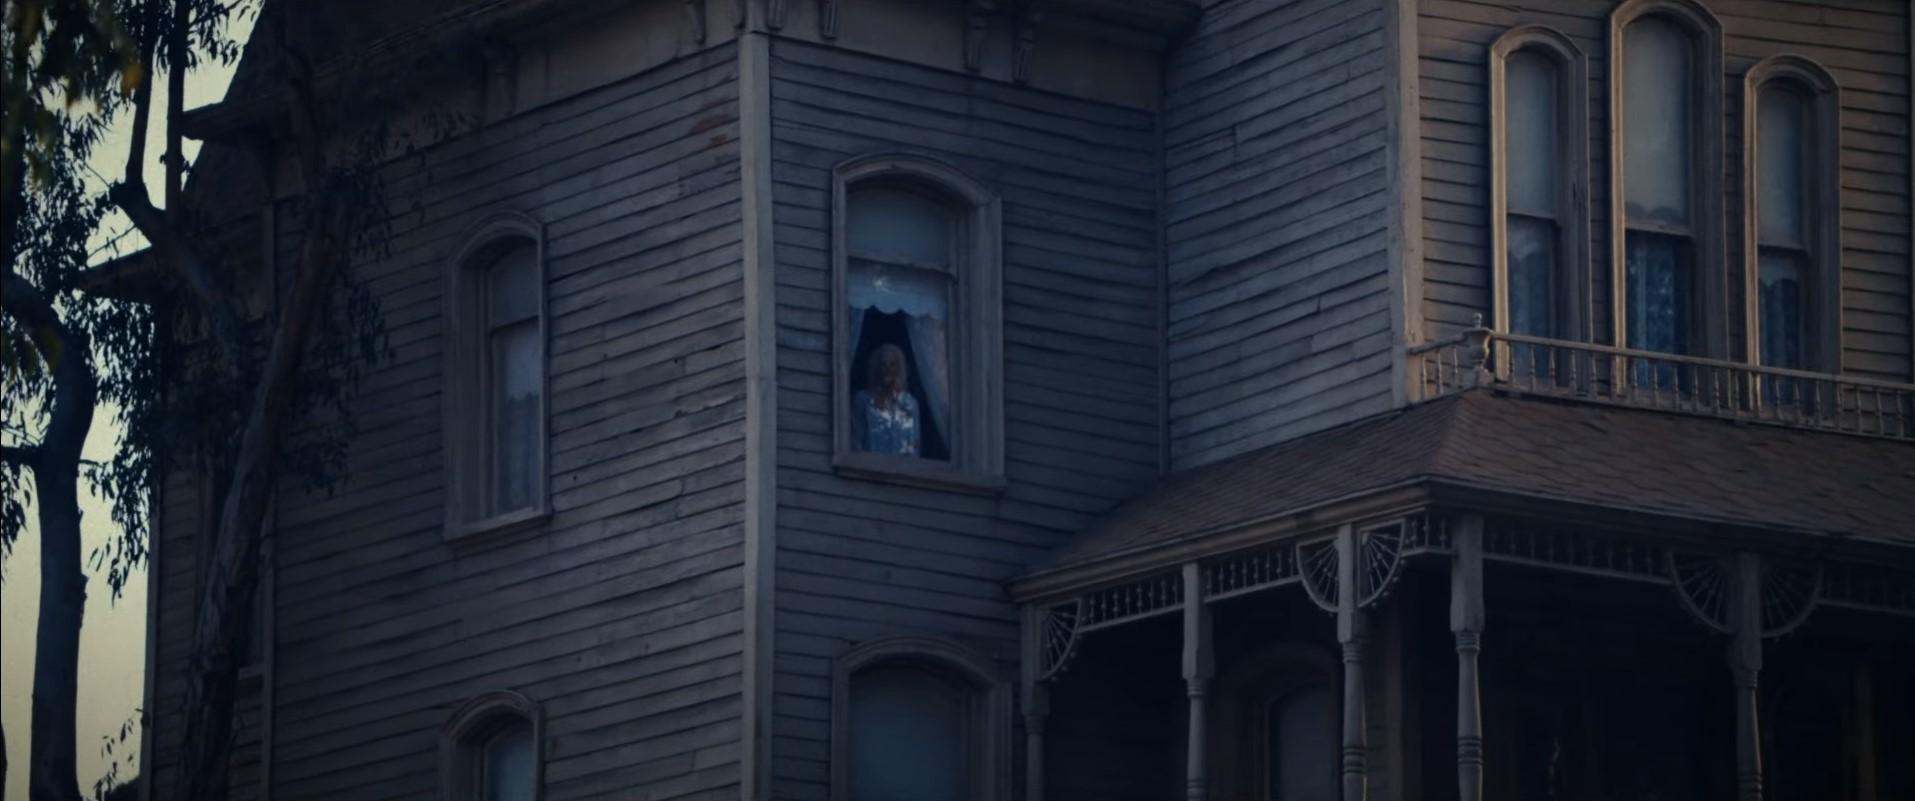 The Psycho house in the MaXXXine trailer.